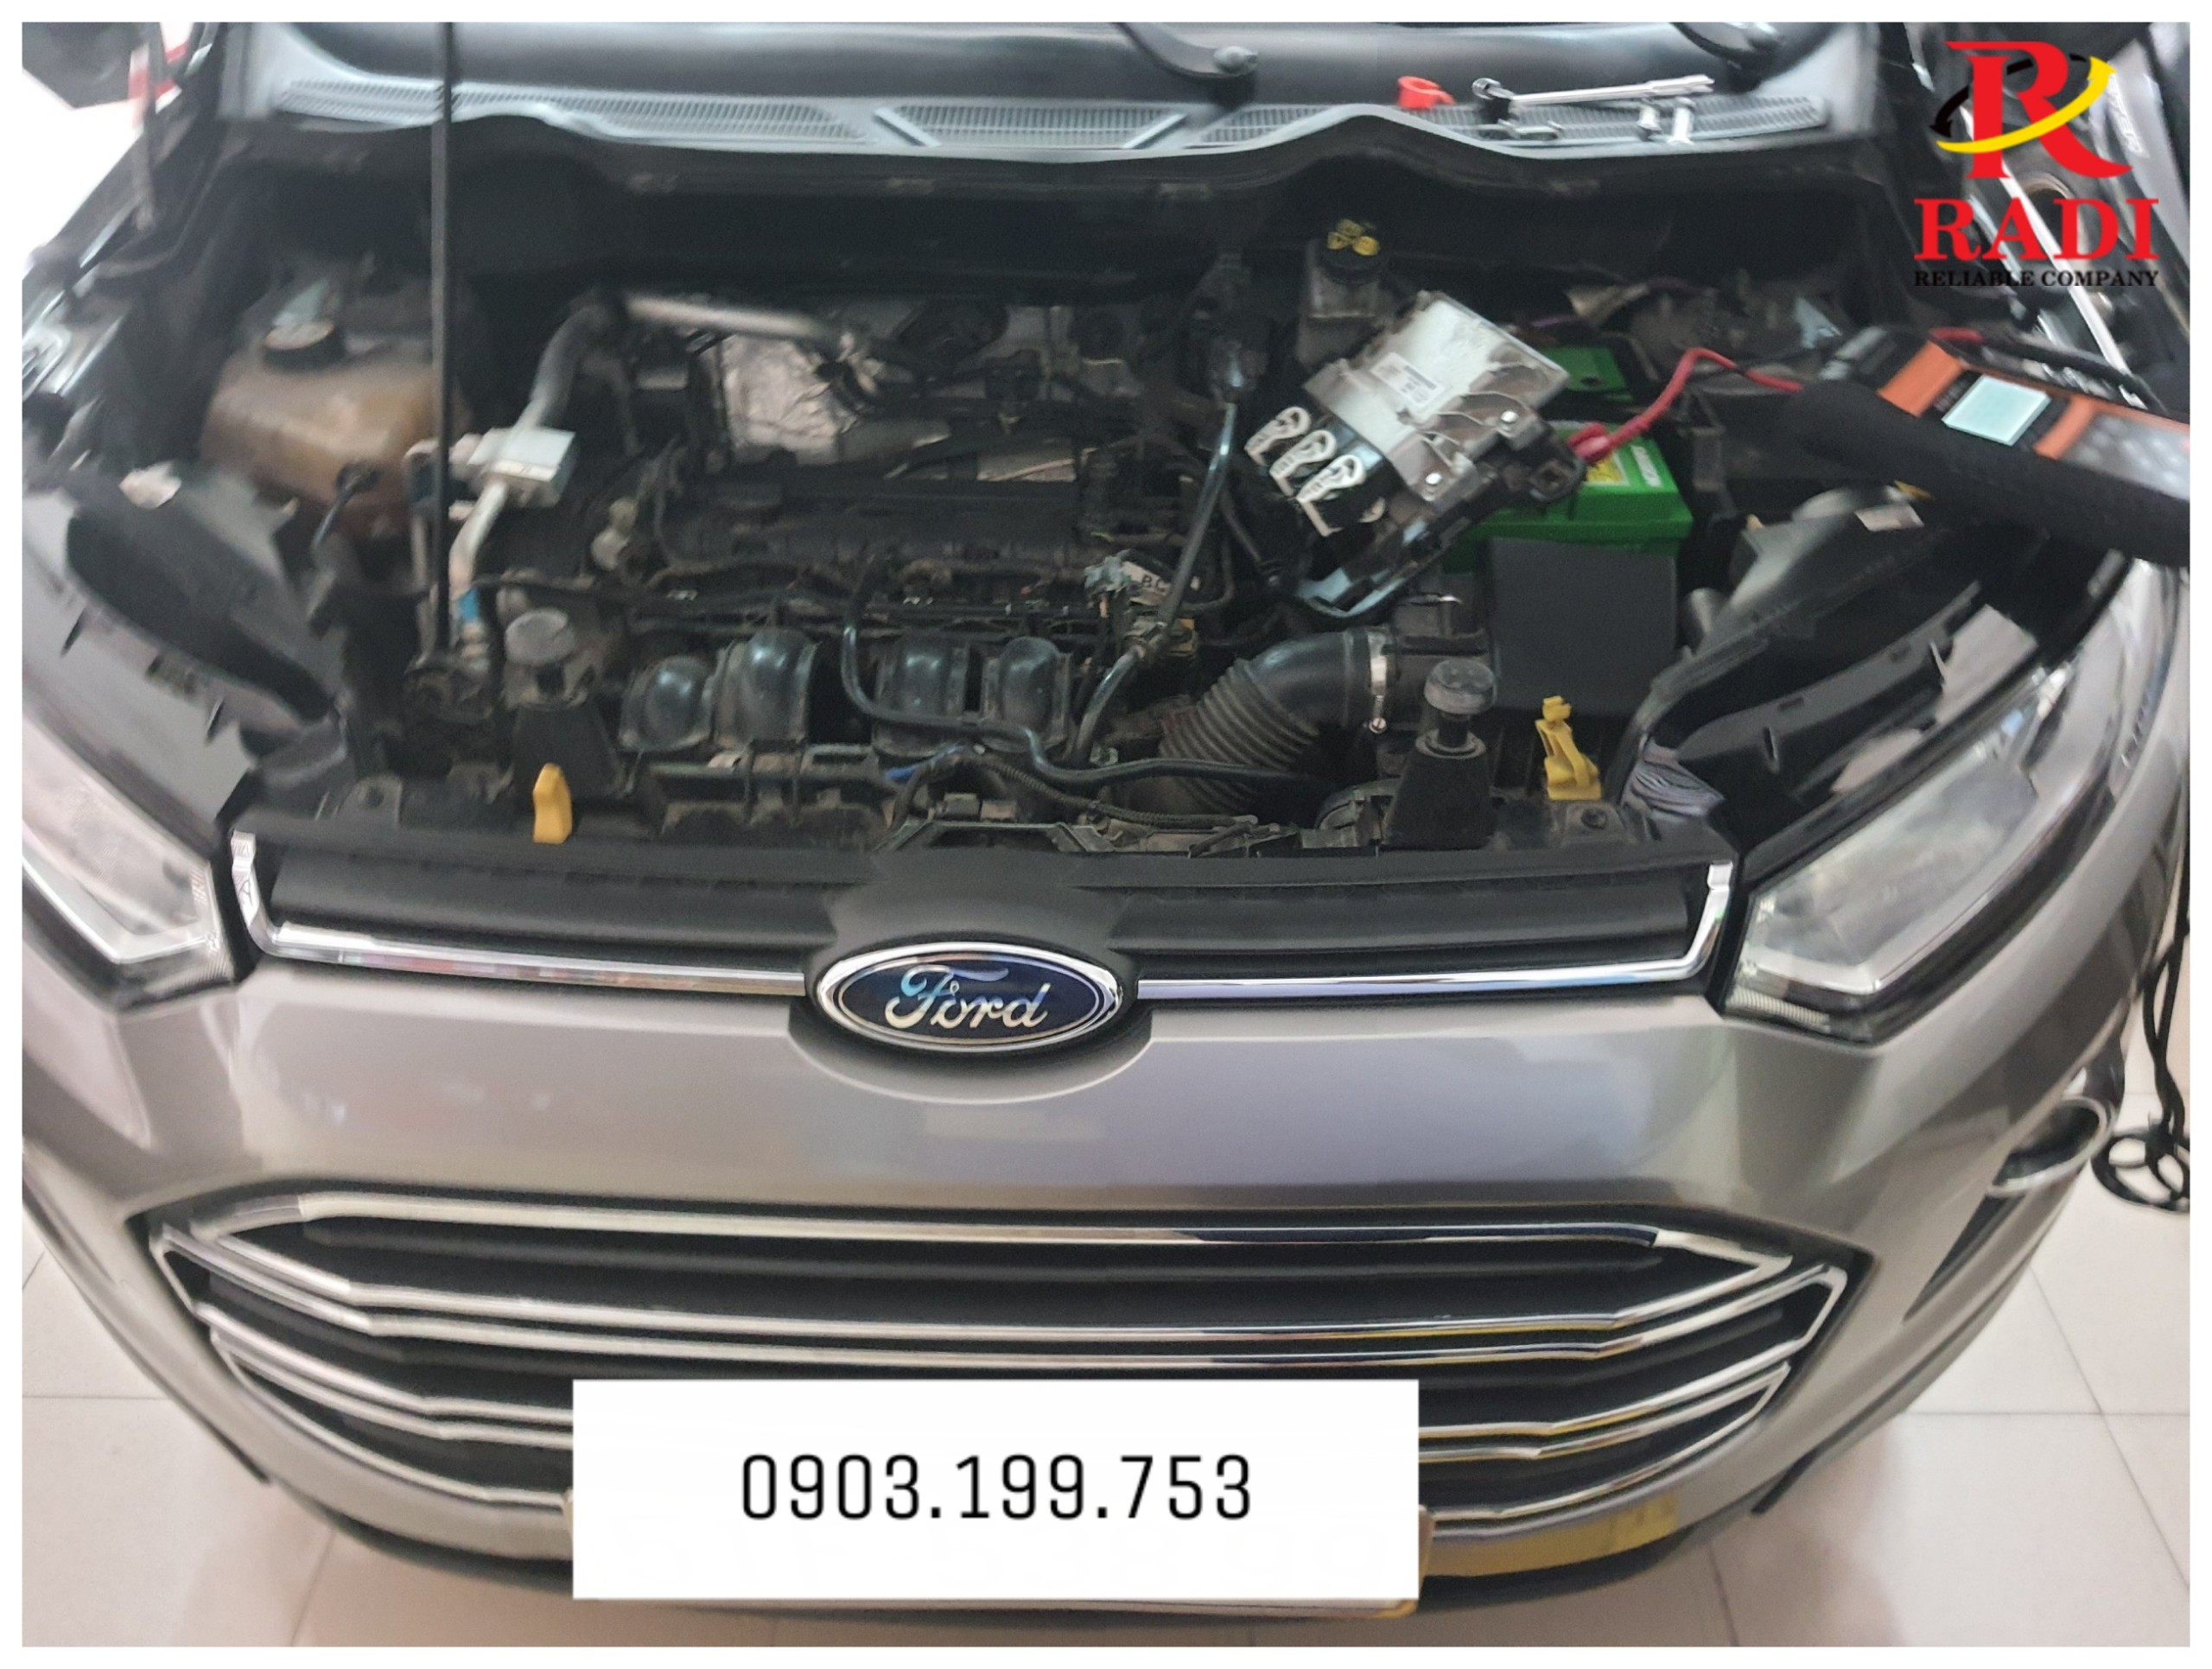 Thay bình ắc quy xe Ford Ecosport